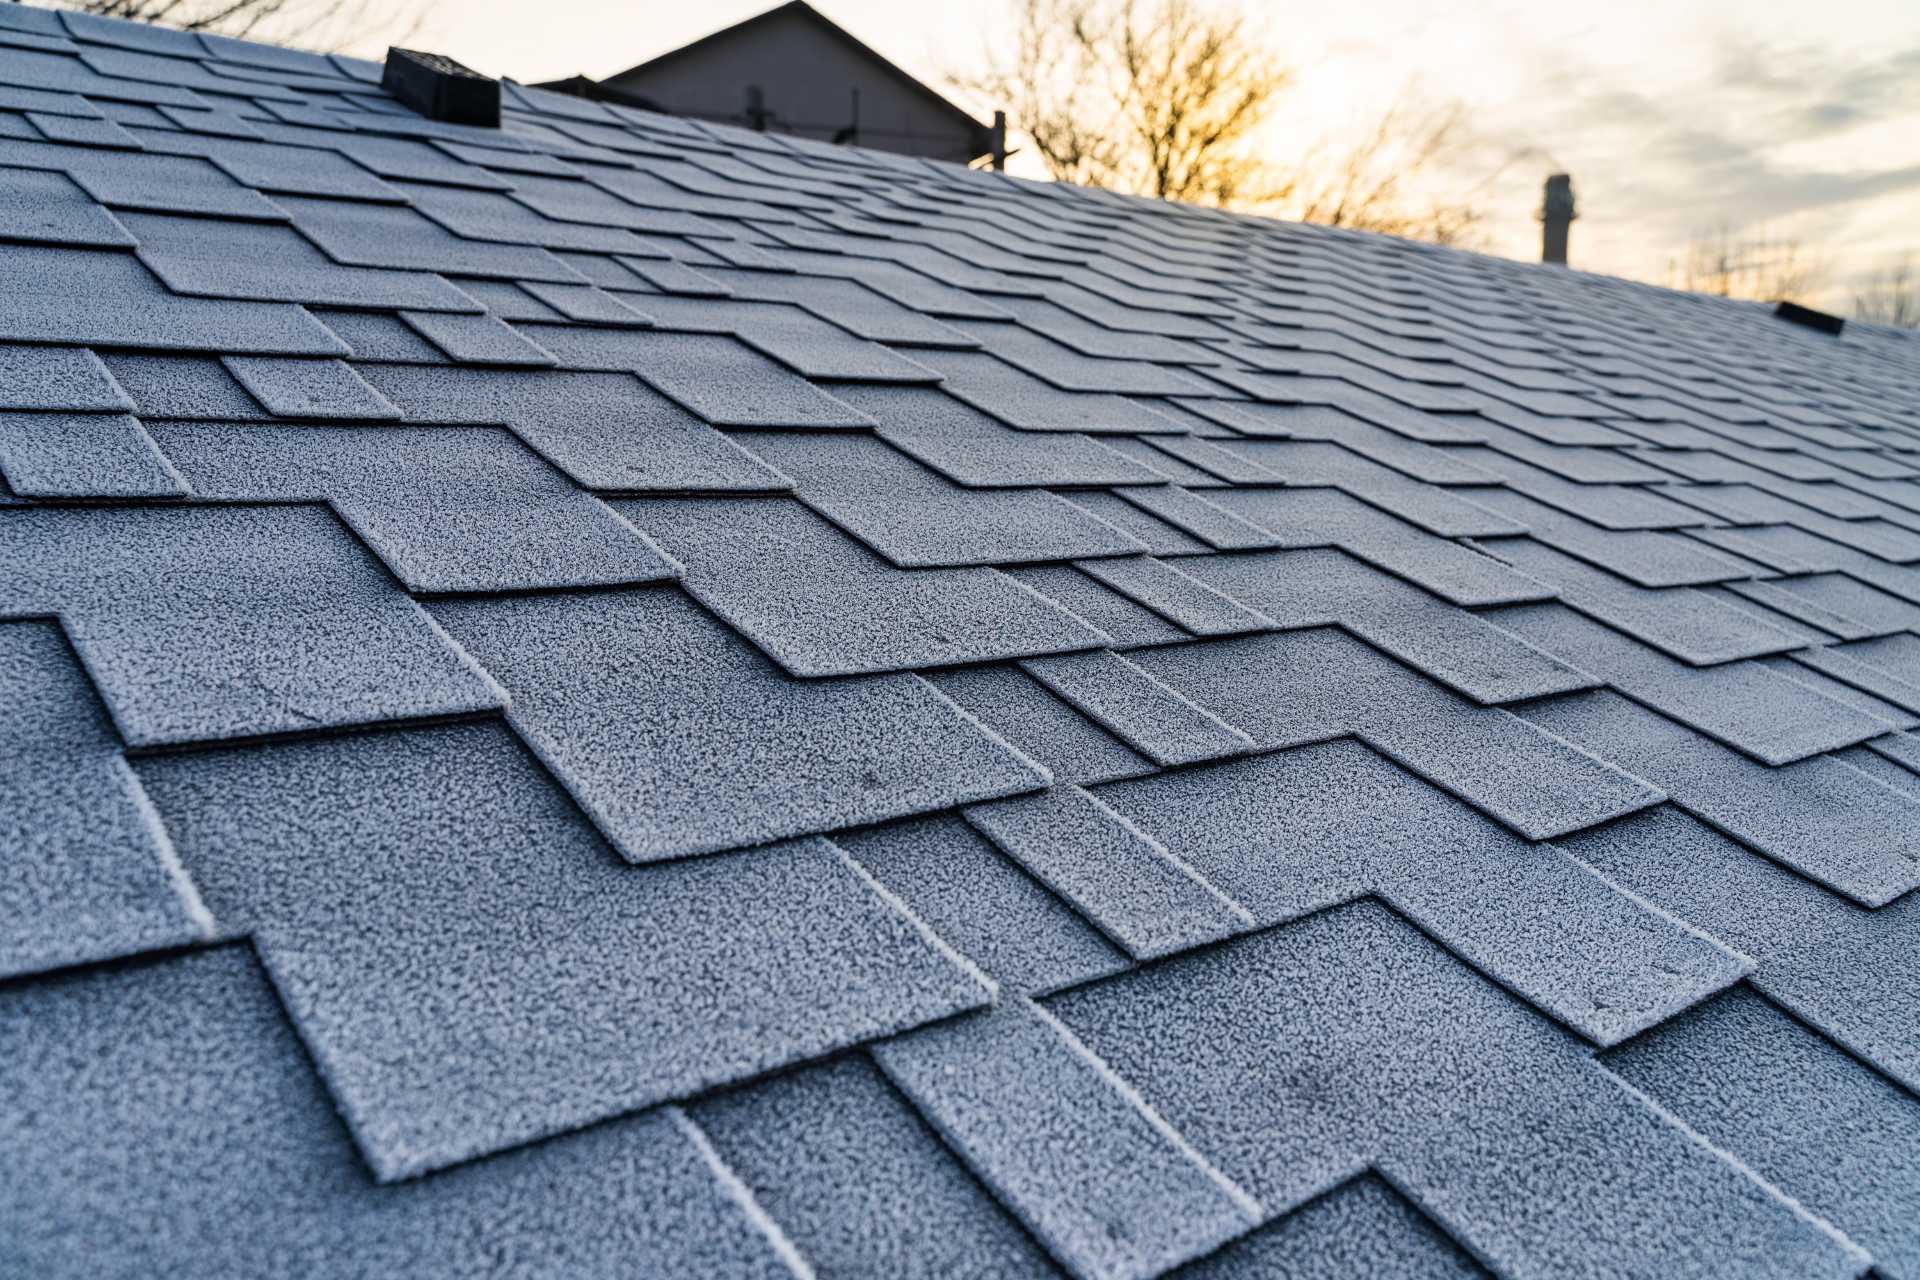 Which Roof Lasts Longer Metal or Shingles